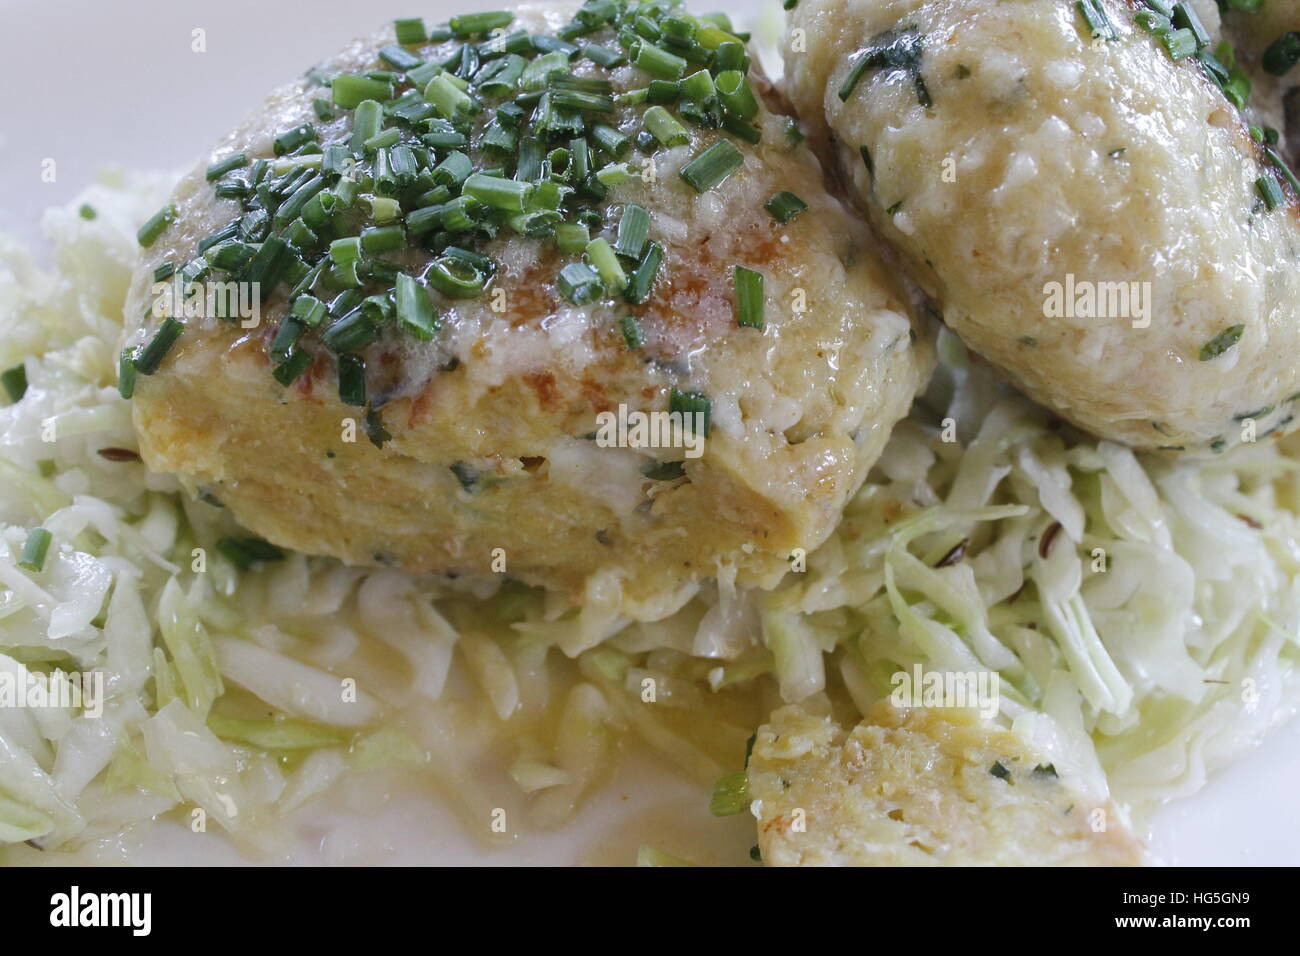 Tyrolean traditional dish, knodel or canederli with parsley Stock Photo